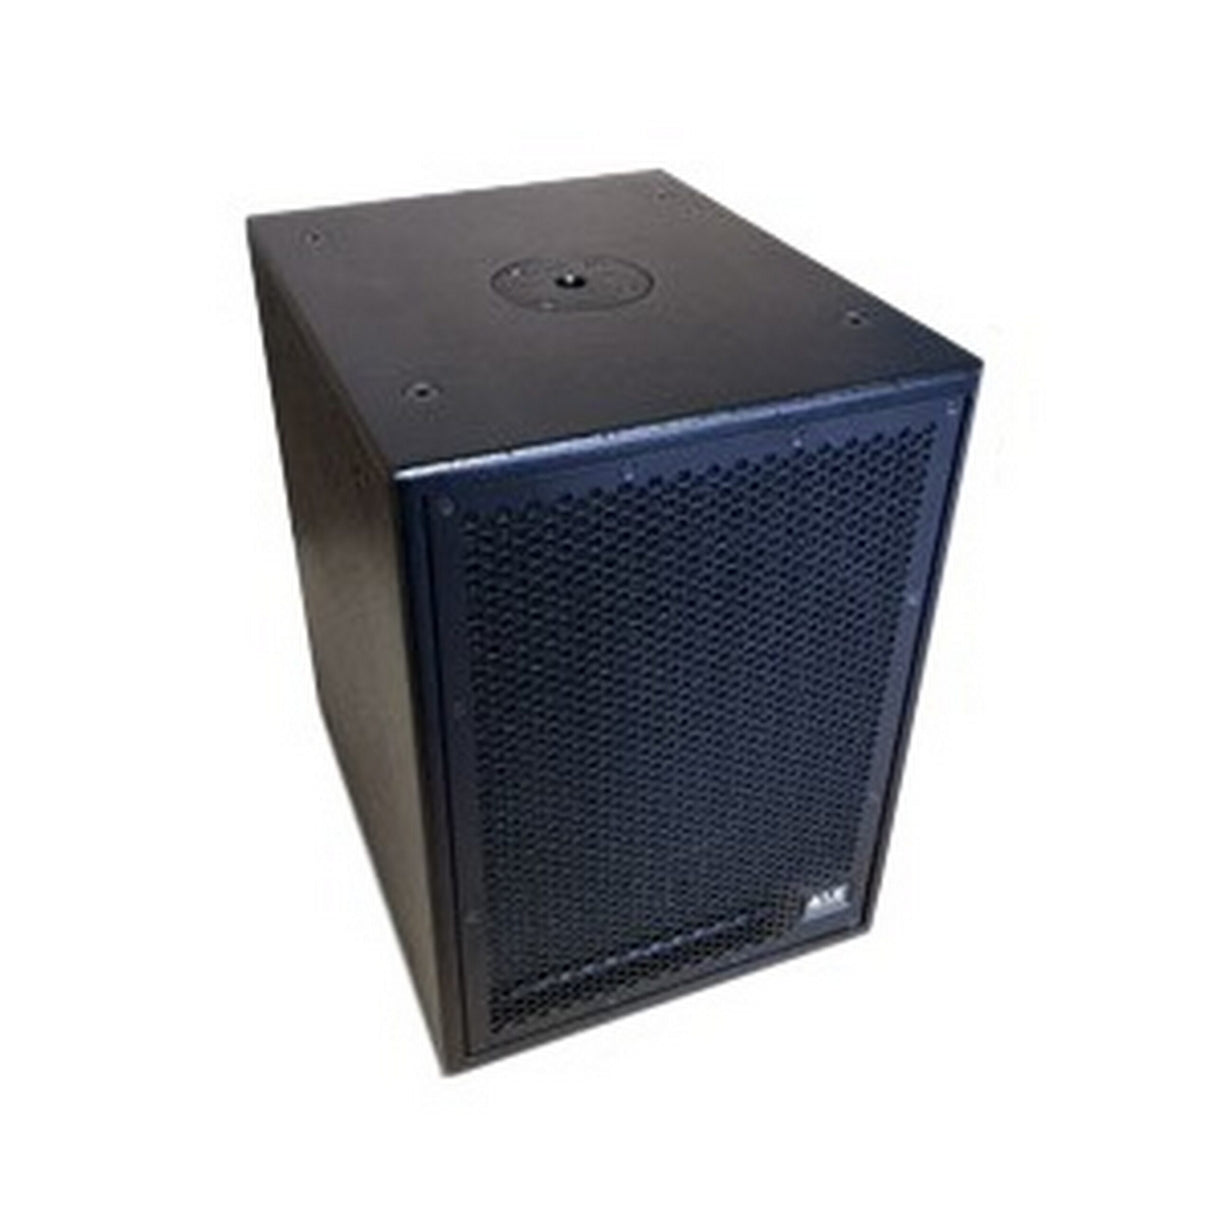 VUE Audiotechnik is-12 Compact Passive Installation Subwoofer System, Single 12 Inch